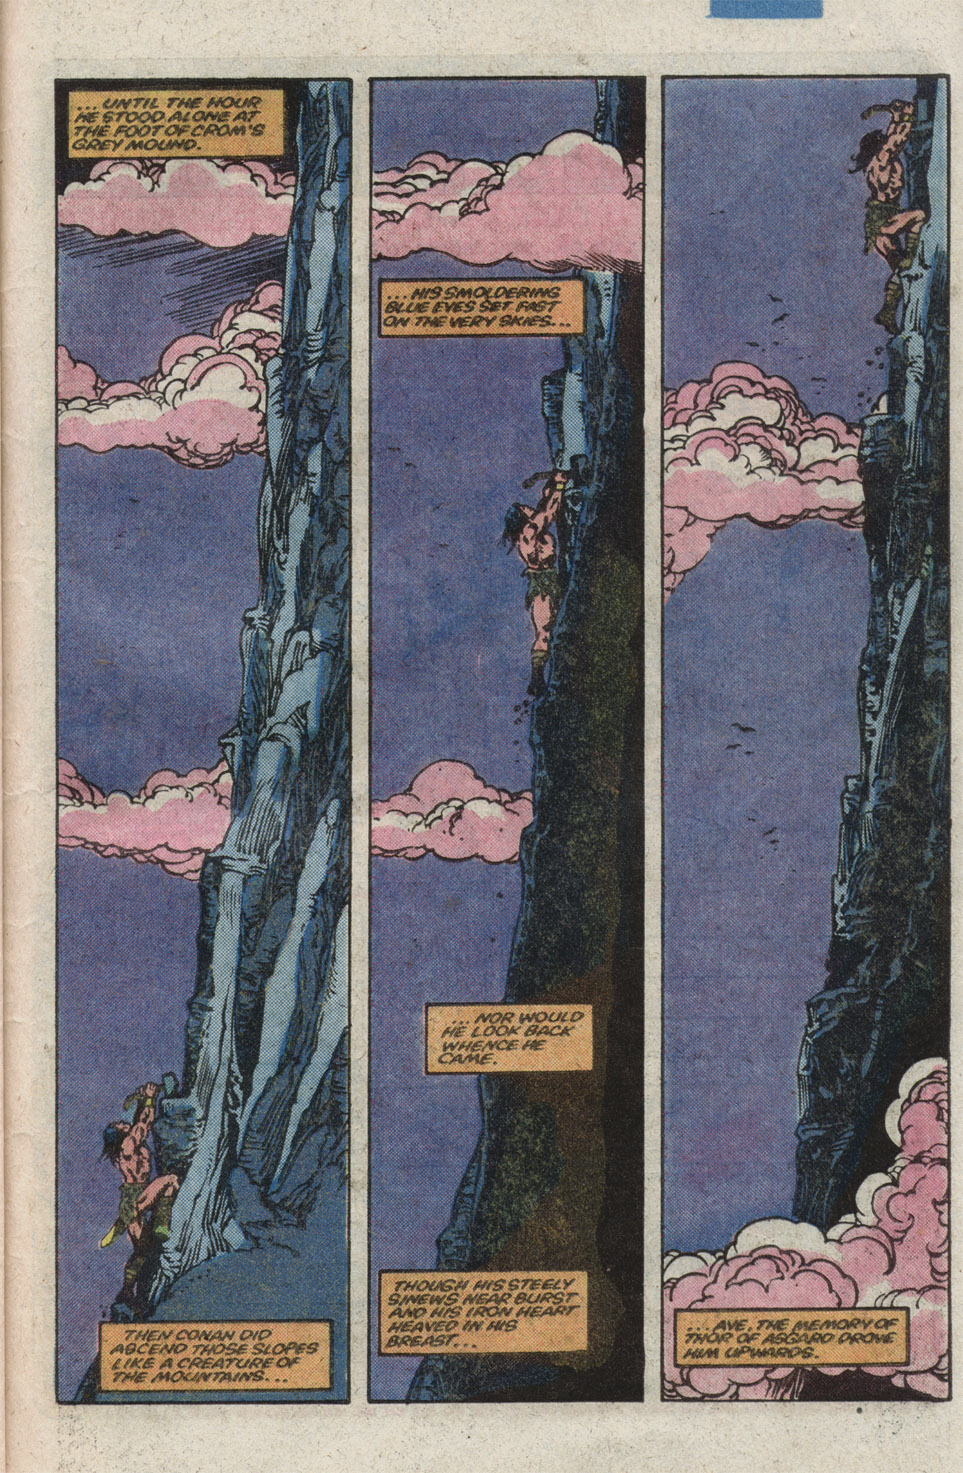 What If? (1977) issue 39 - Thor battled conan - Page 45